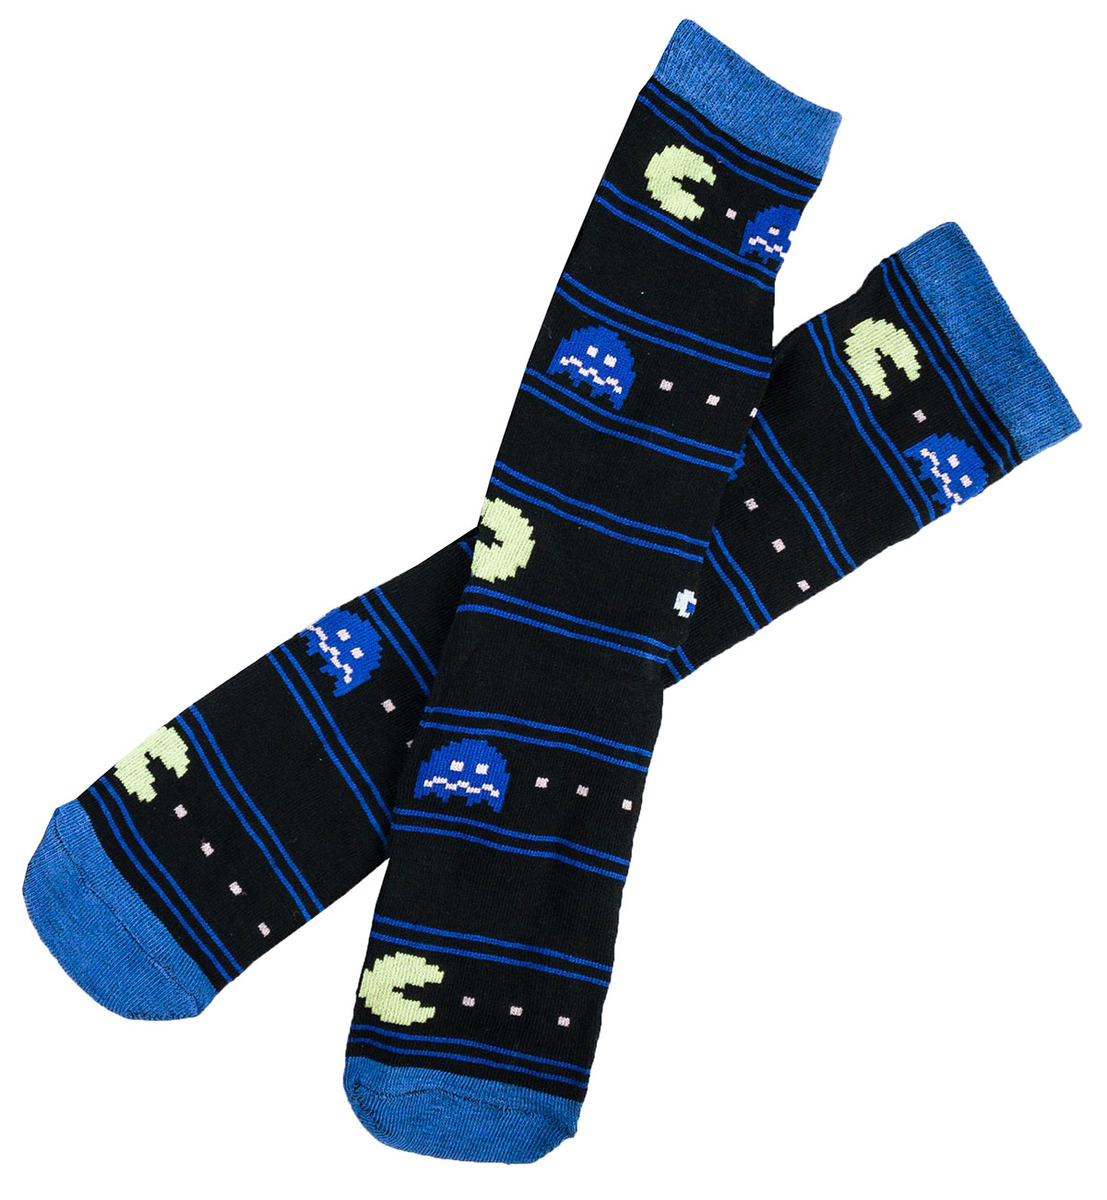 Pac-Man Crew Socks - Loot Crate Exclusive - New - Mens Size 6-12